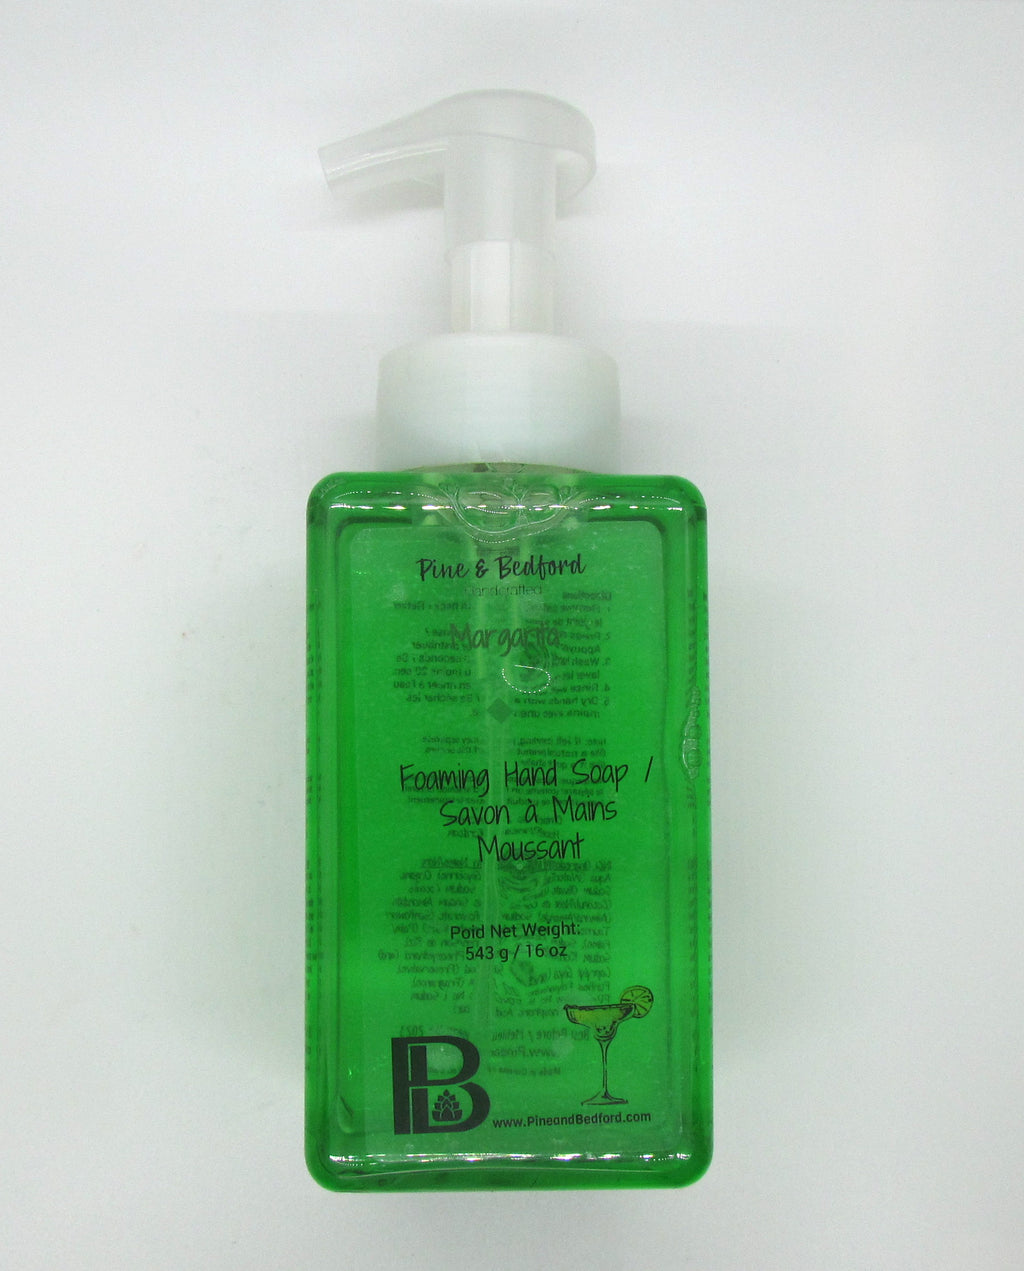 Pine & Bedford's Foaming Hand Soap made with Sweet Almond, Rice Bran and Castor Oils.  Available in an assortment of Fragrances and Essential Oils.  Margarita fragrance shown here.